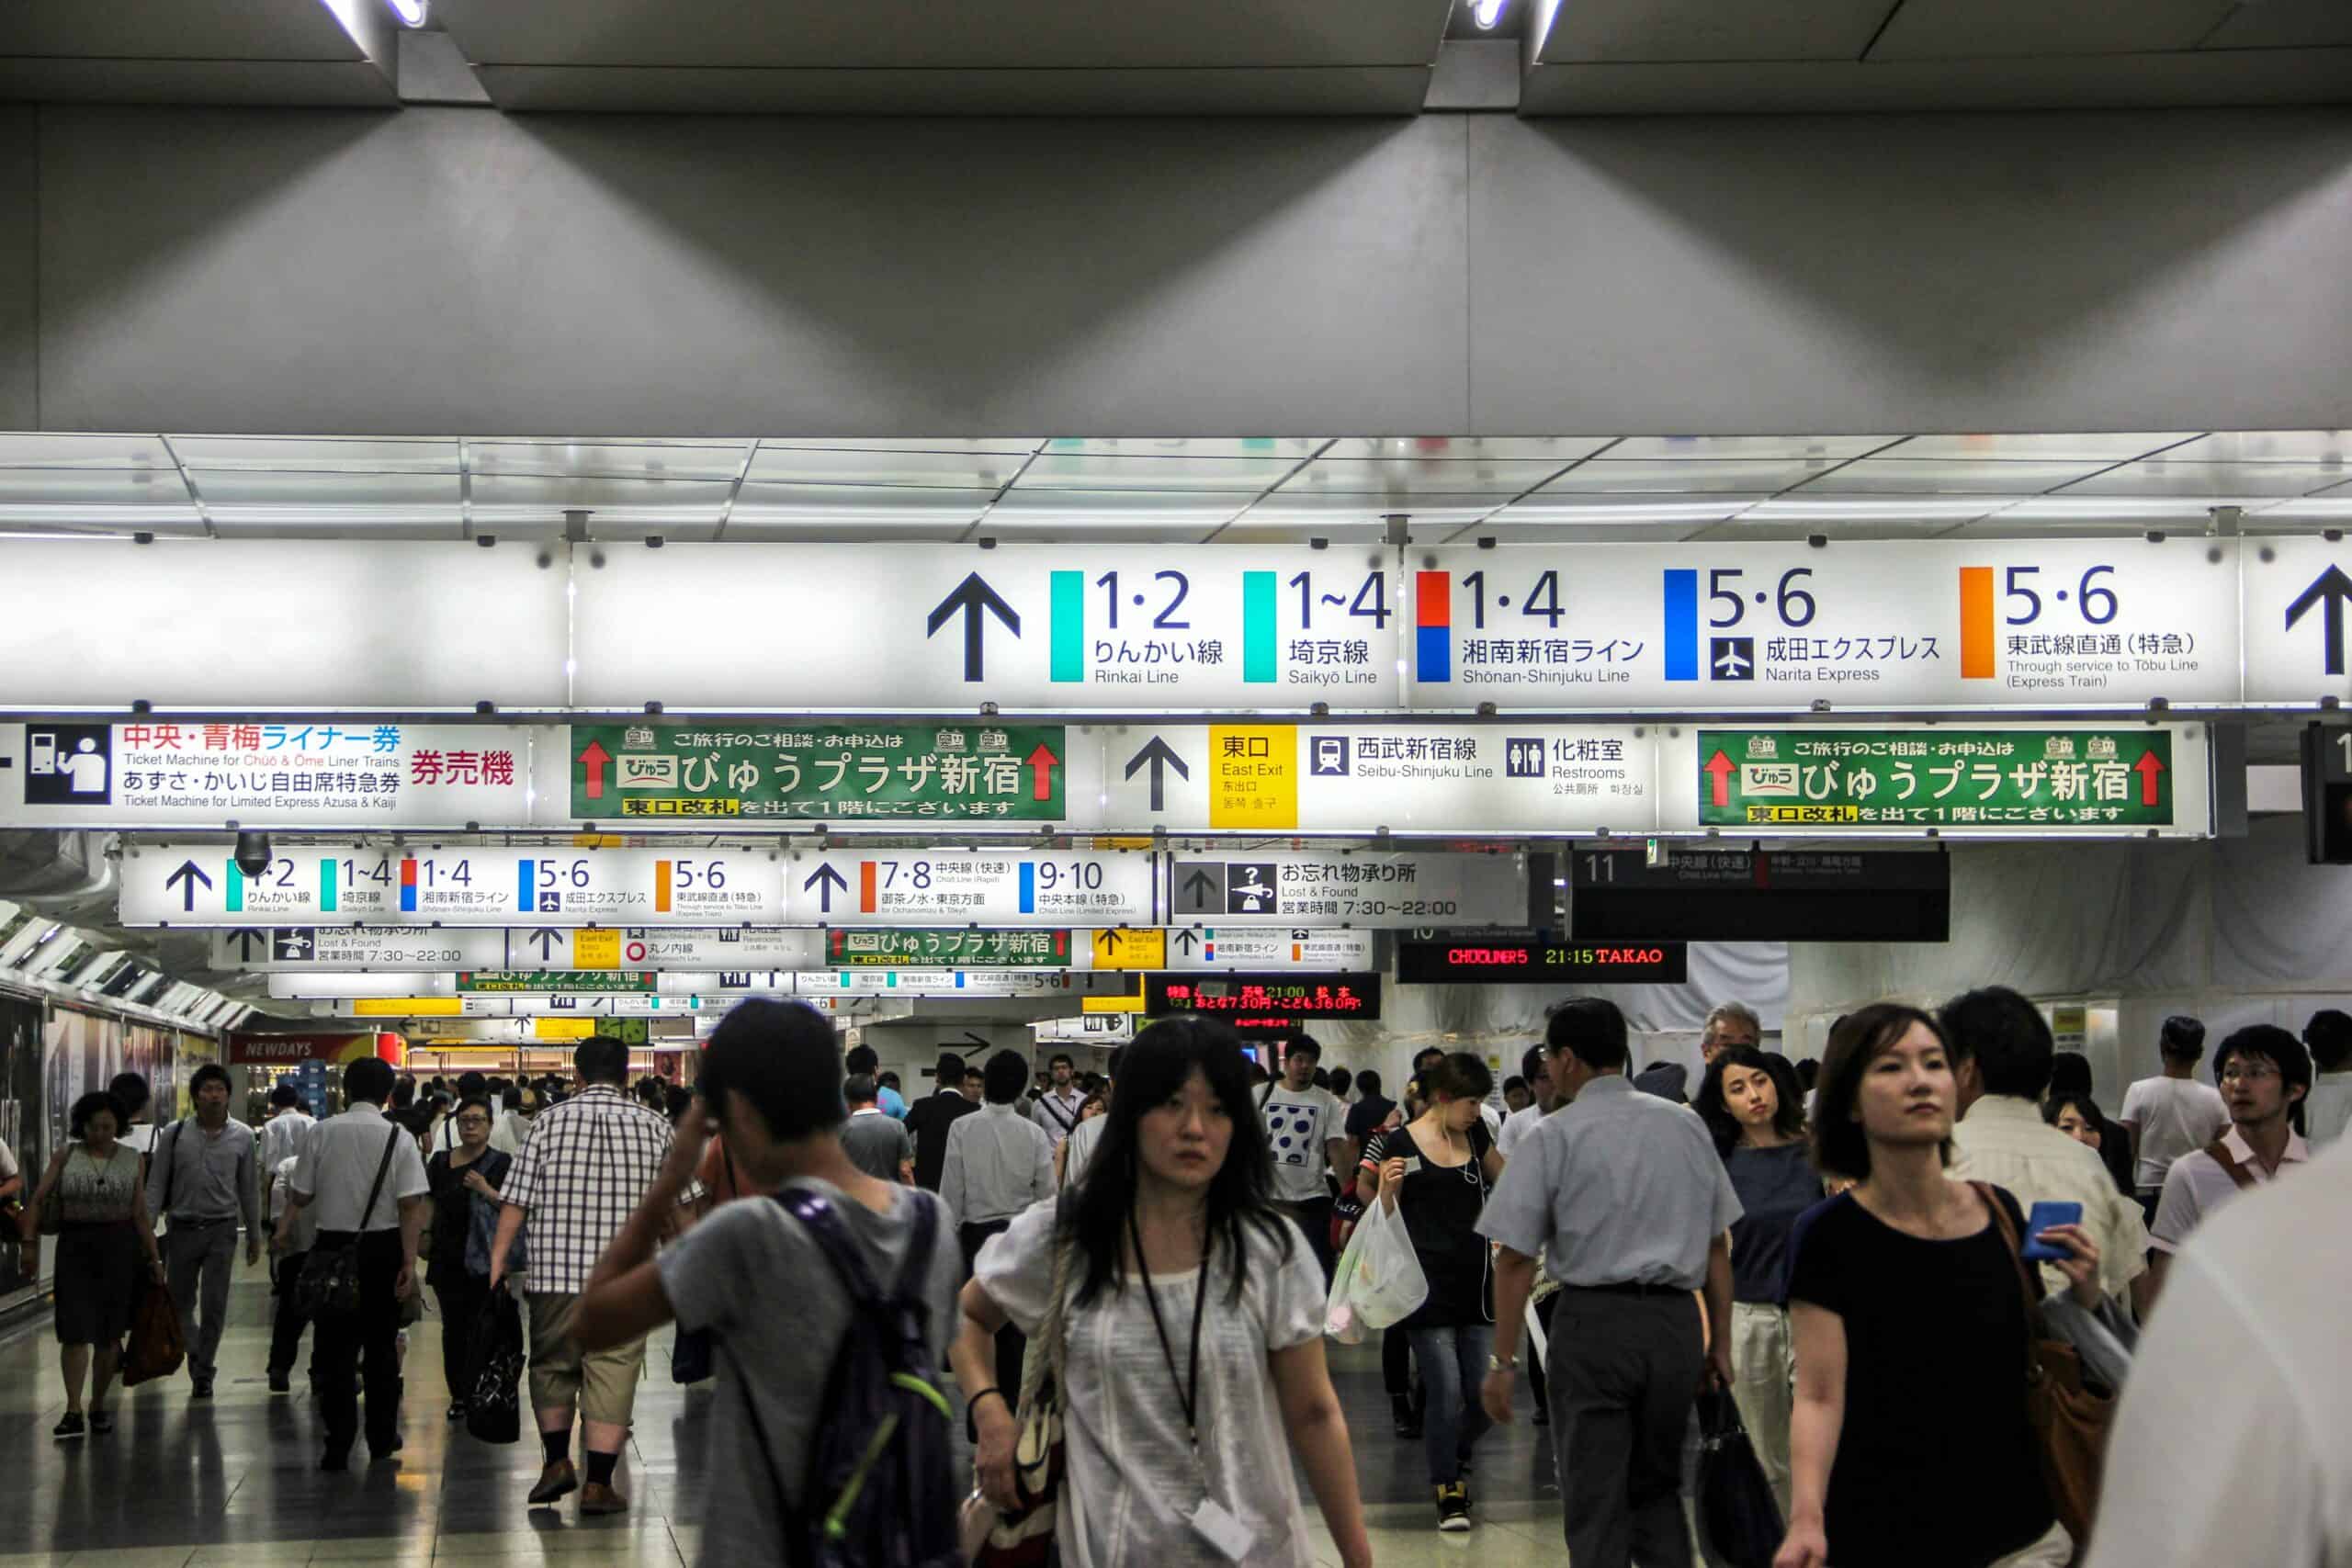 A mass of people walking through the Tokyo metro system in Japan under endless rows of signs with platforms numbers and arrows.